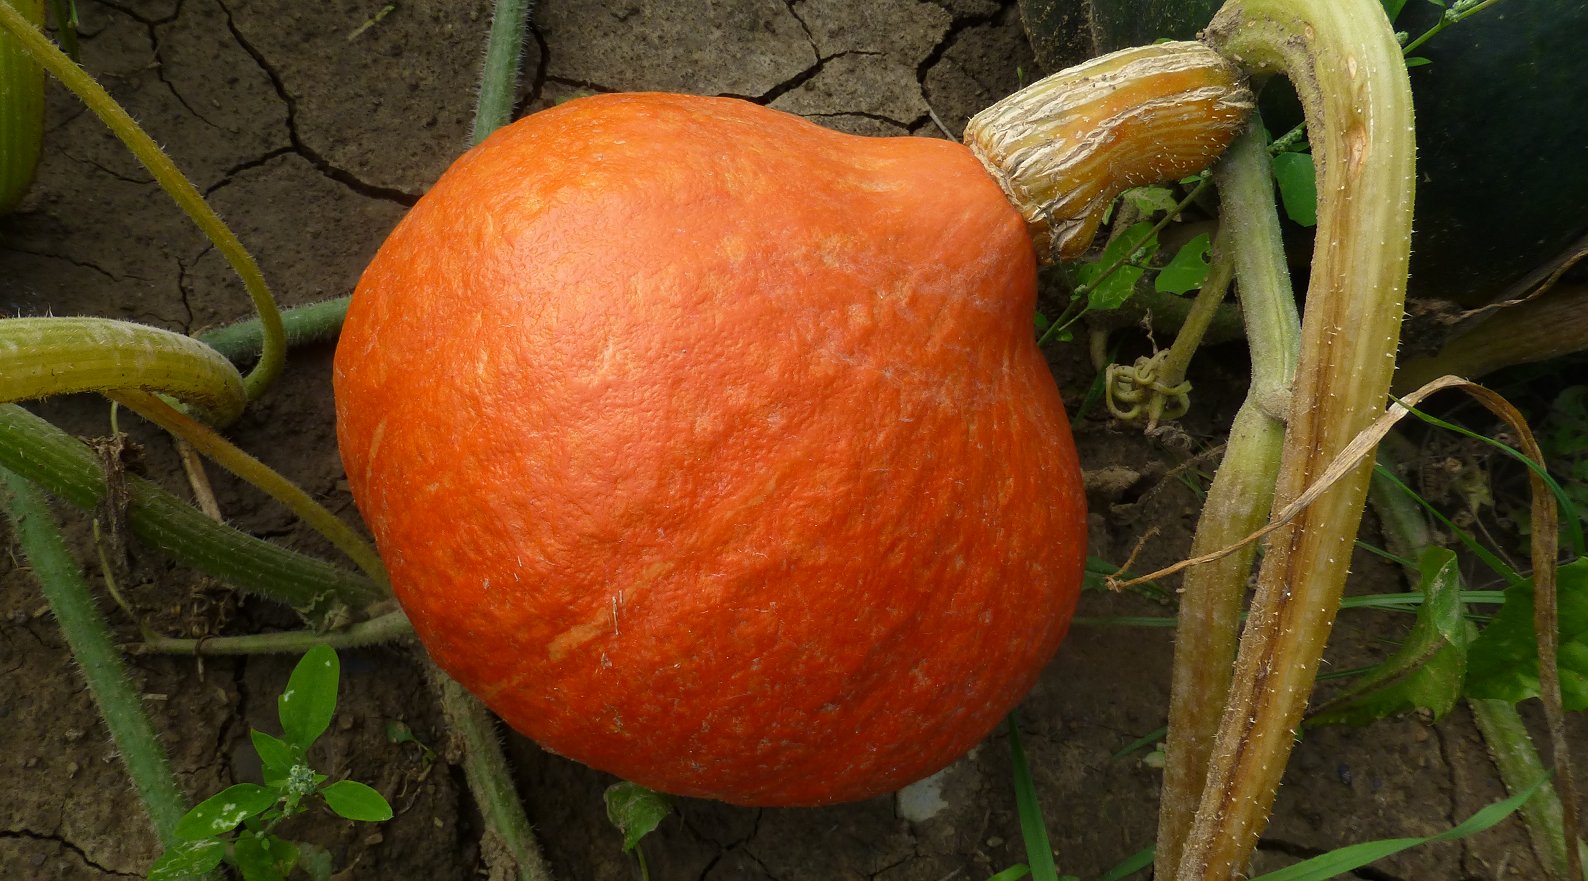 an orange squash in the midst of growing green vegetables